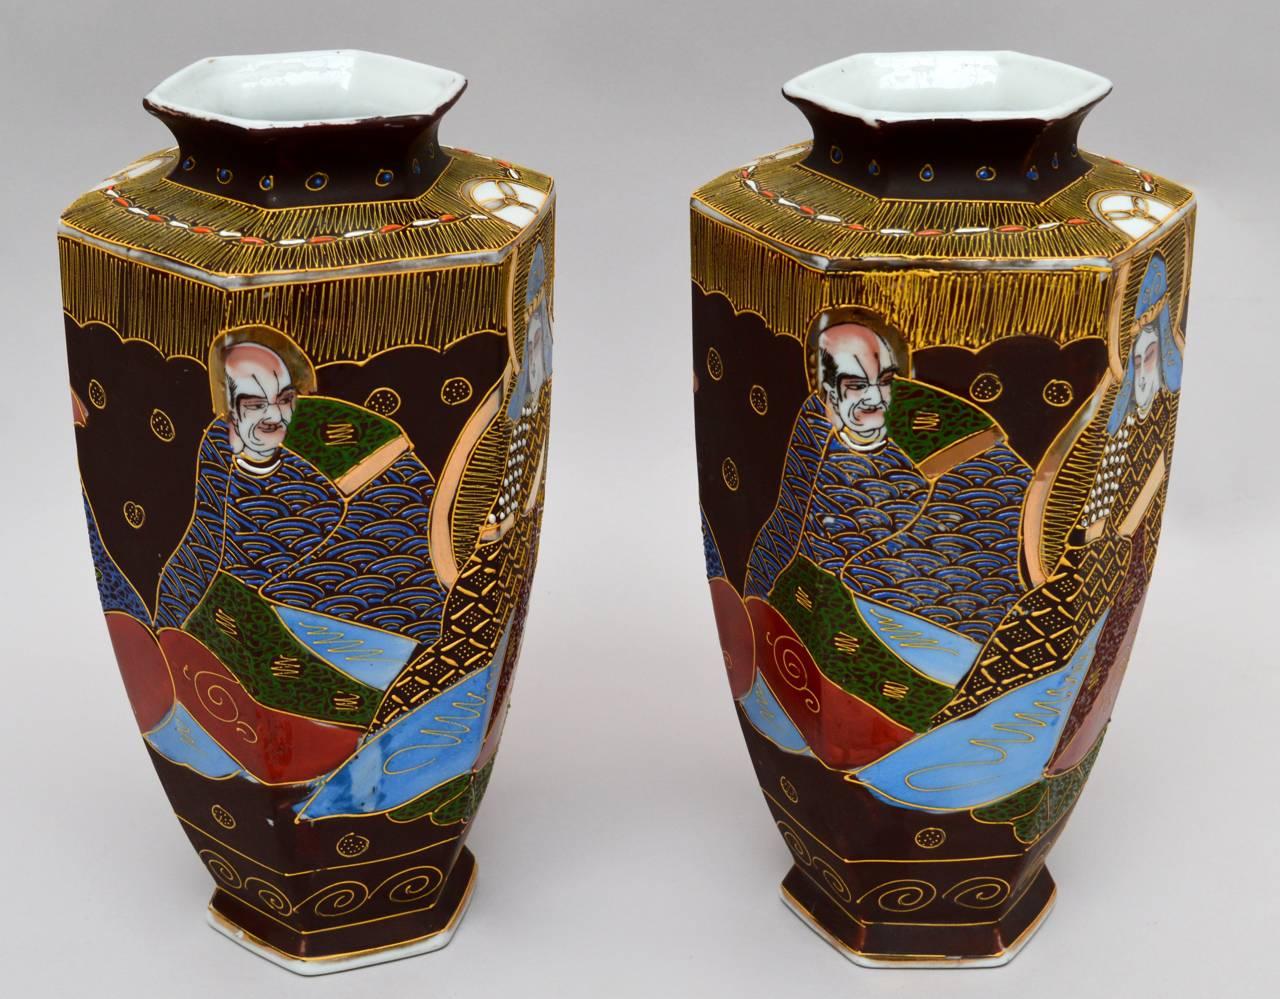 A pair of Japanese hand-painted Satsuma vases in an uncommon hexagonal shape. Excellent condition. Made in the mid-1930s for the European export market and marked ;made in Japan
Most of the Japanese ceramics from 1921 to 1941 are marked either Japan